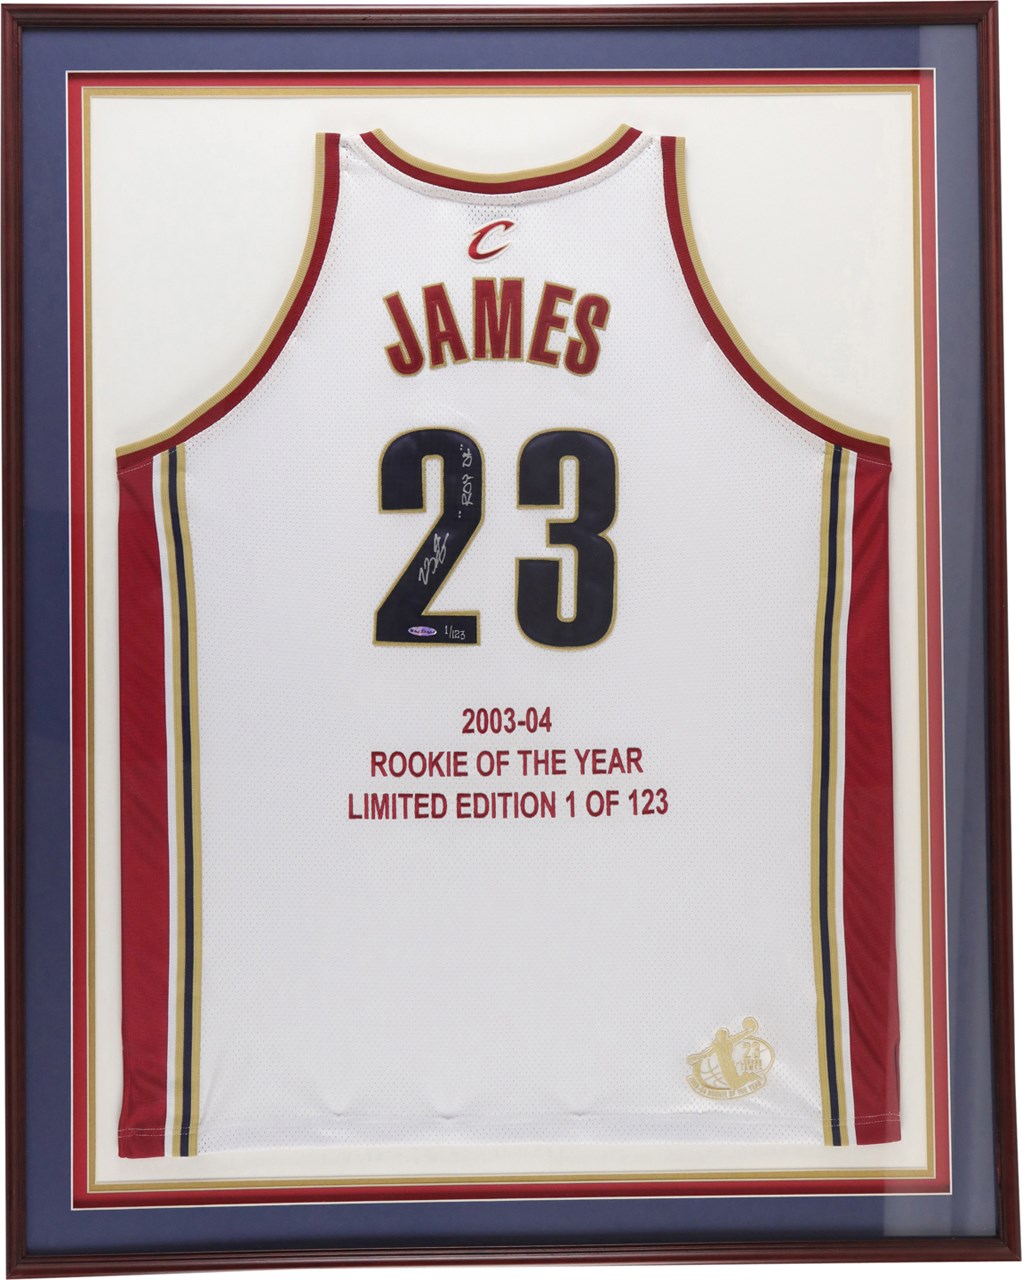 - 2003-04 LeBron James Cleveland Cavaliers Signed Rookie of the Year Jersey - Limited Edition - Hand-Numbered 1/123 (UDA)